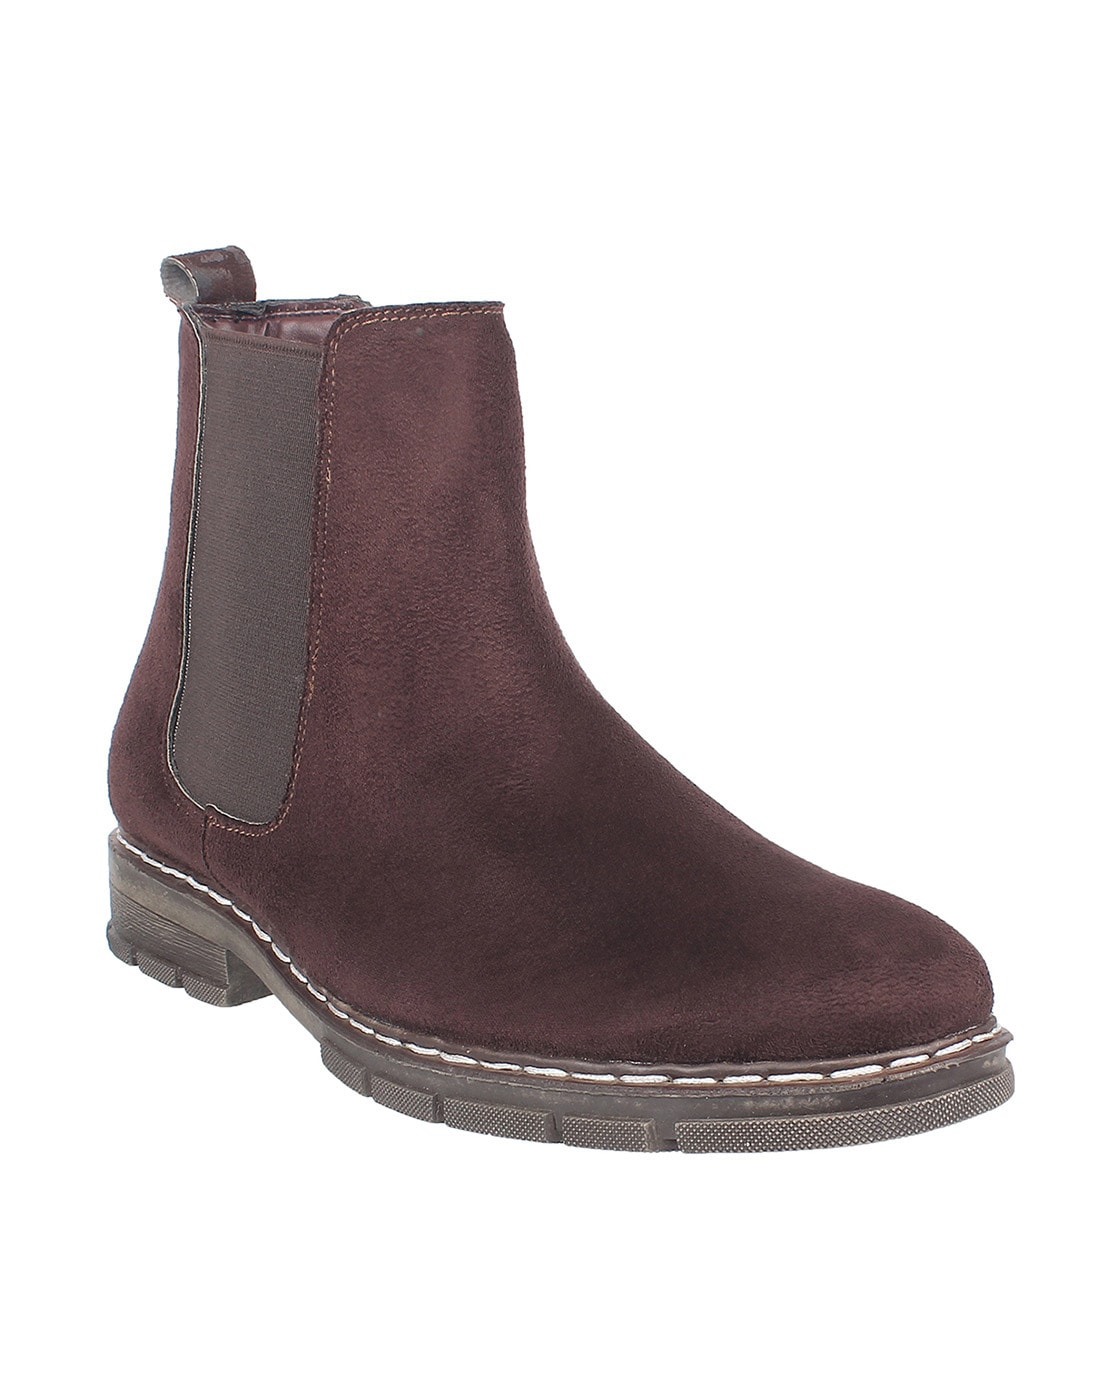 Buy Maroon Boots for Men by VARDHRA 